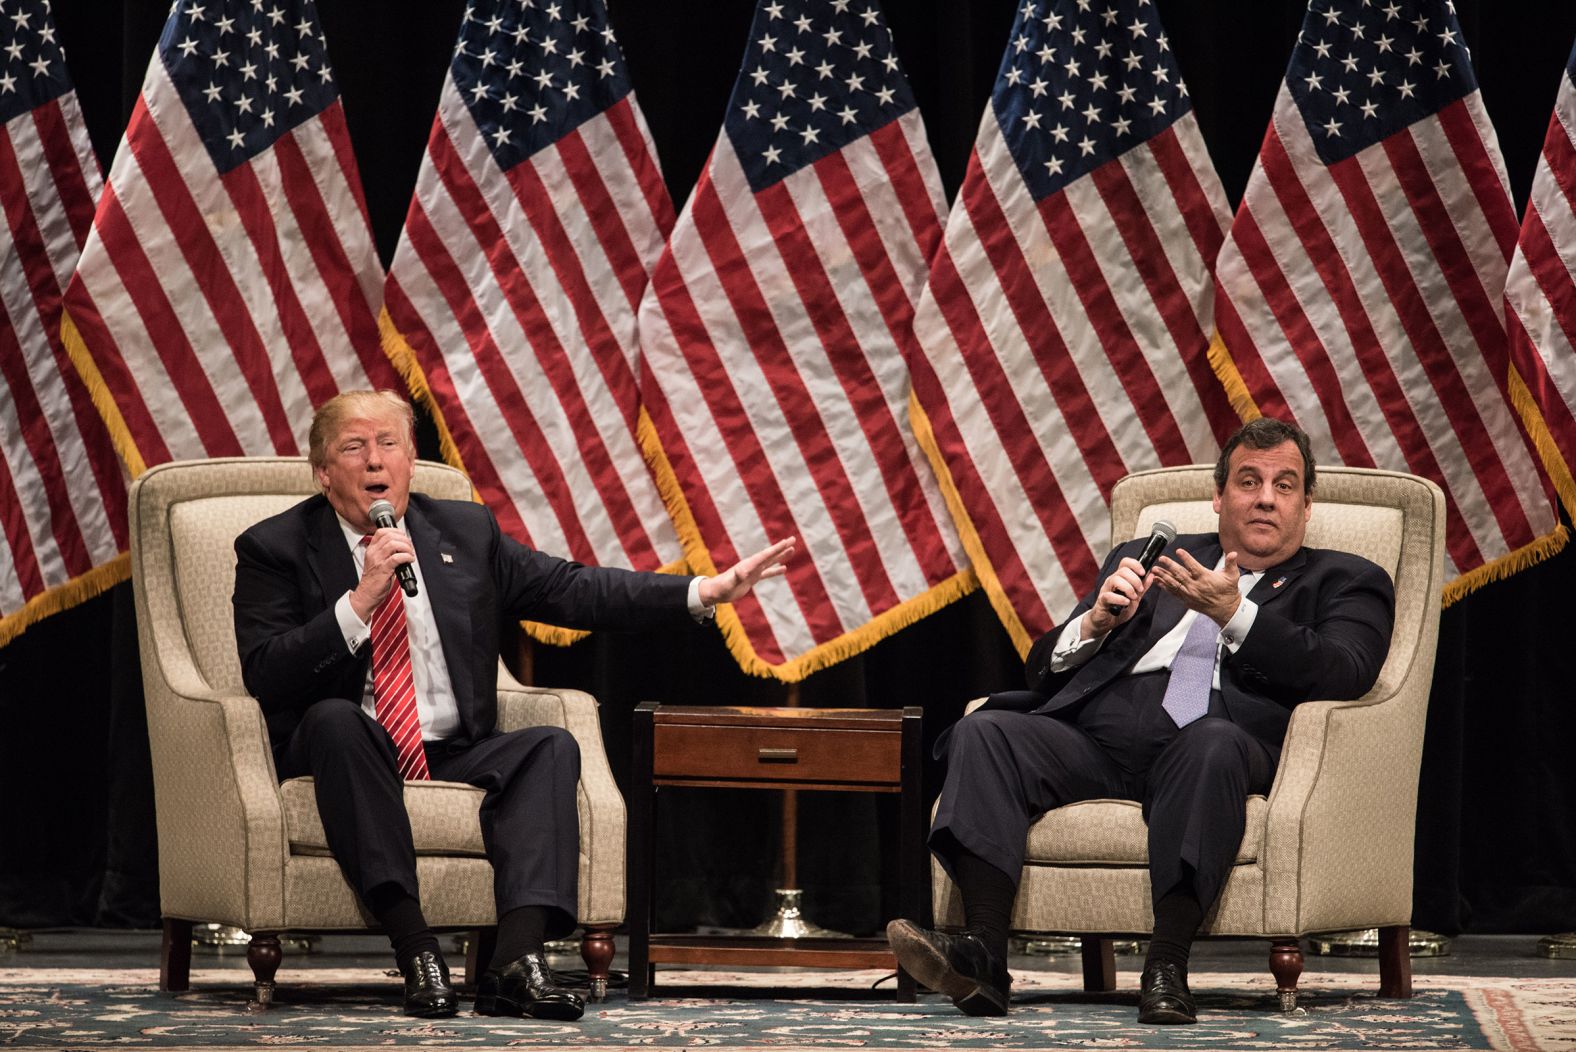 Trump and Christie talk at a campaign rally in Hickory, North Carolina, in March 2016. A few weeks earlier, Christie had suspended his campaign and <a href="index.php?page=&url=http%3A%2F%2Fwww.cnn.com%2F2016%2F02%2F26%2Fpolitics%2Fchris-christie-endorses-donald-trump%2F" target="_blank">endorsed Trump</a> for president. "There is no one who is better prepared to provide America with the strong leadership that it needs," he said.